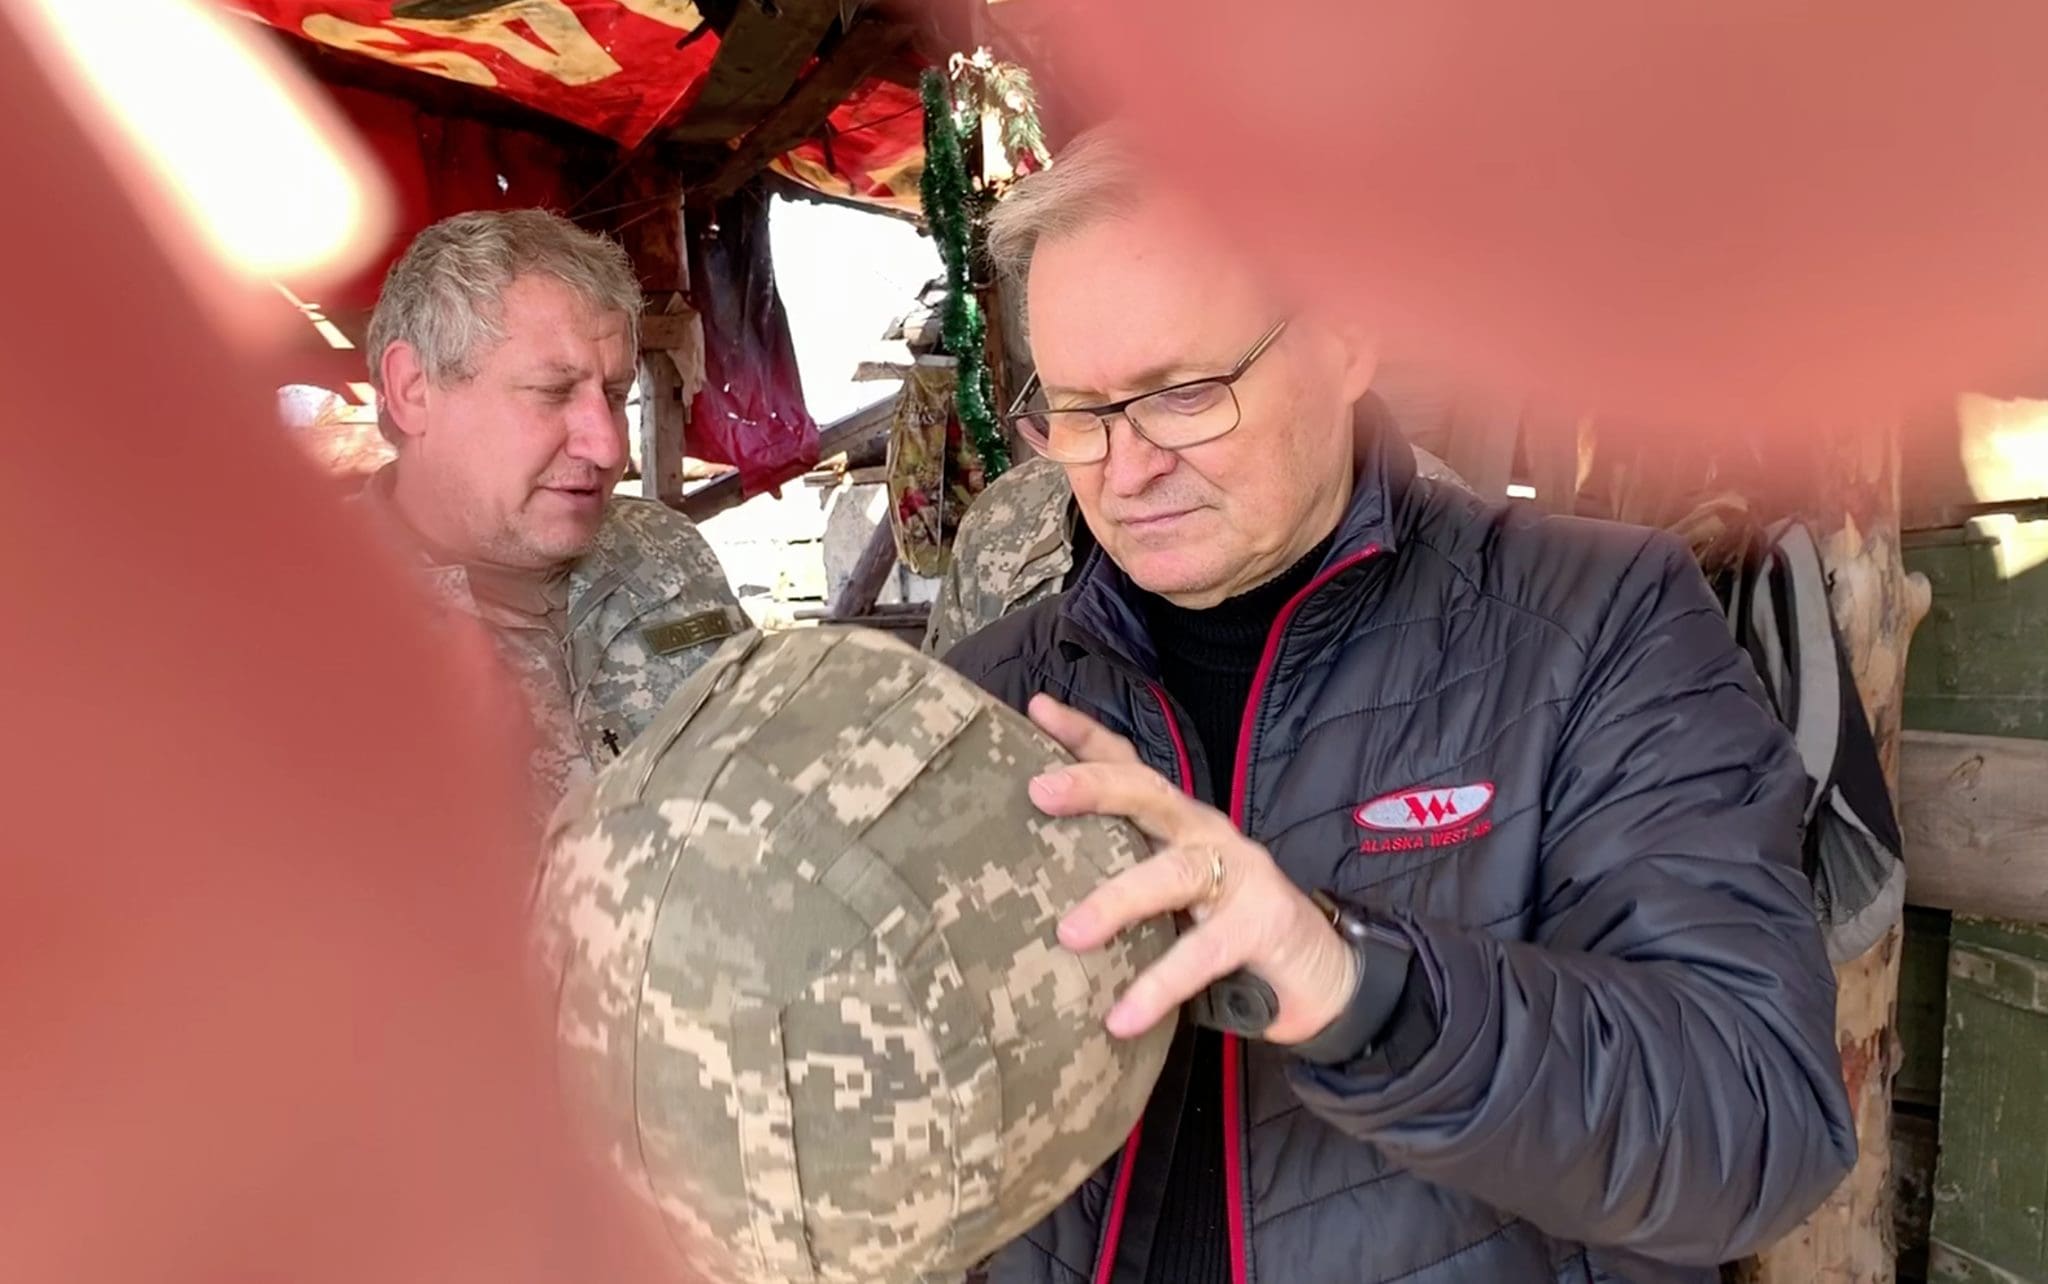 Hannu Haukka visits Ukrainian soldiers located in a forward positon within 2 hundred meters of the Russian backed rebel forces. The area is restricted and closed to the civilian population.